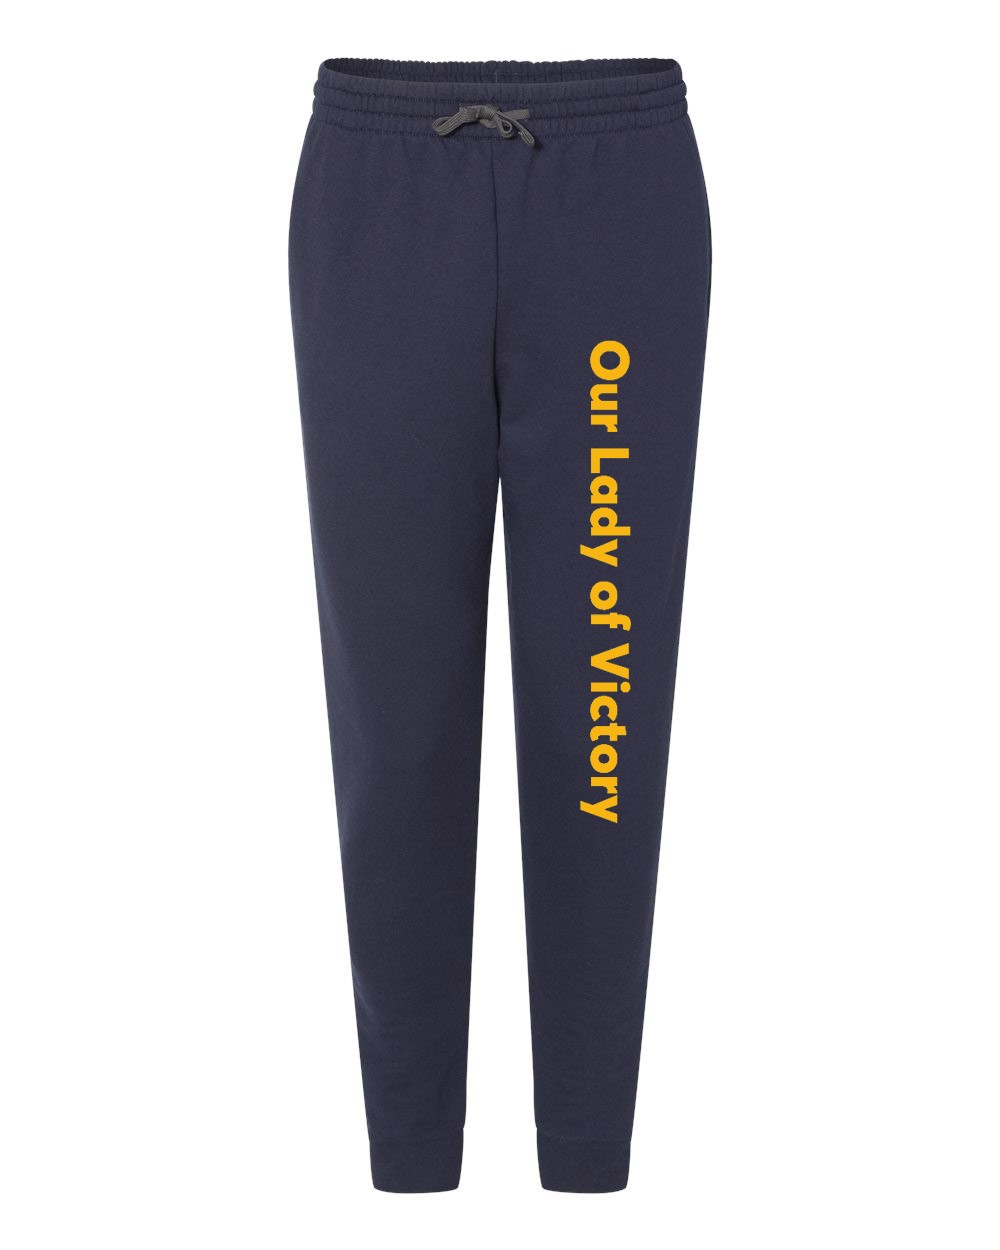 OLV Navy Joggers w/ Logo - Please Allow 2-3 Weeks for Delivery